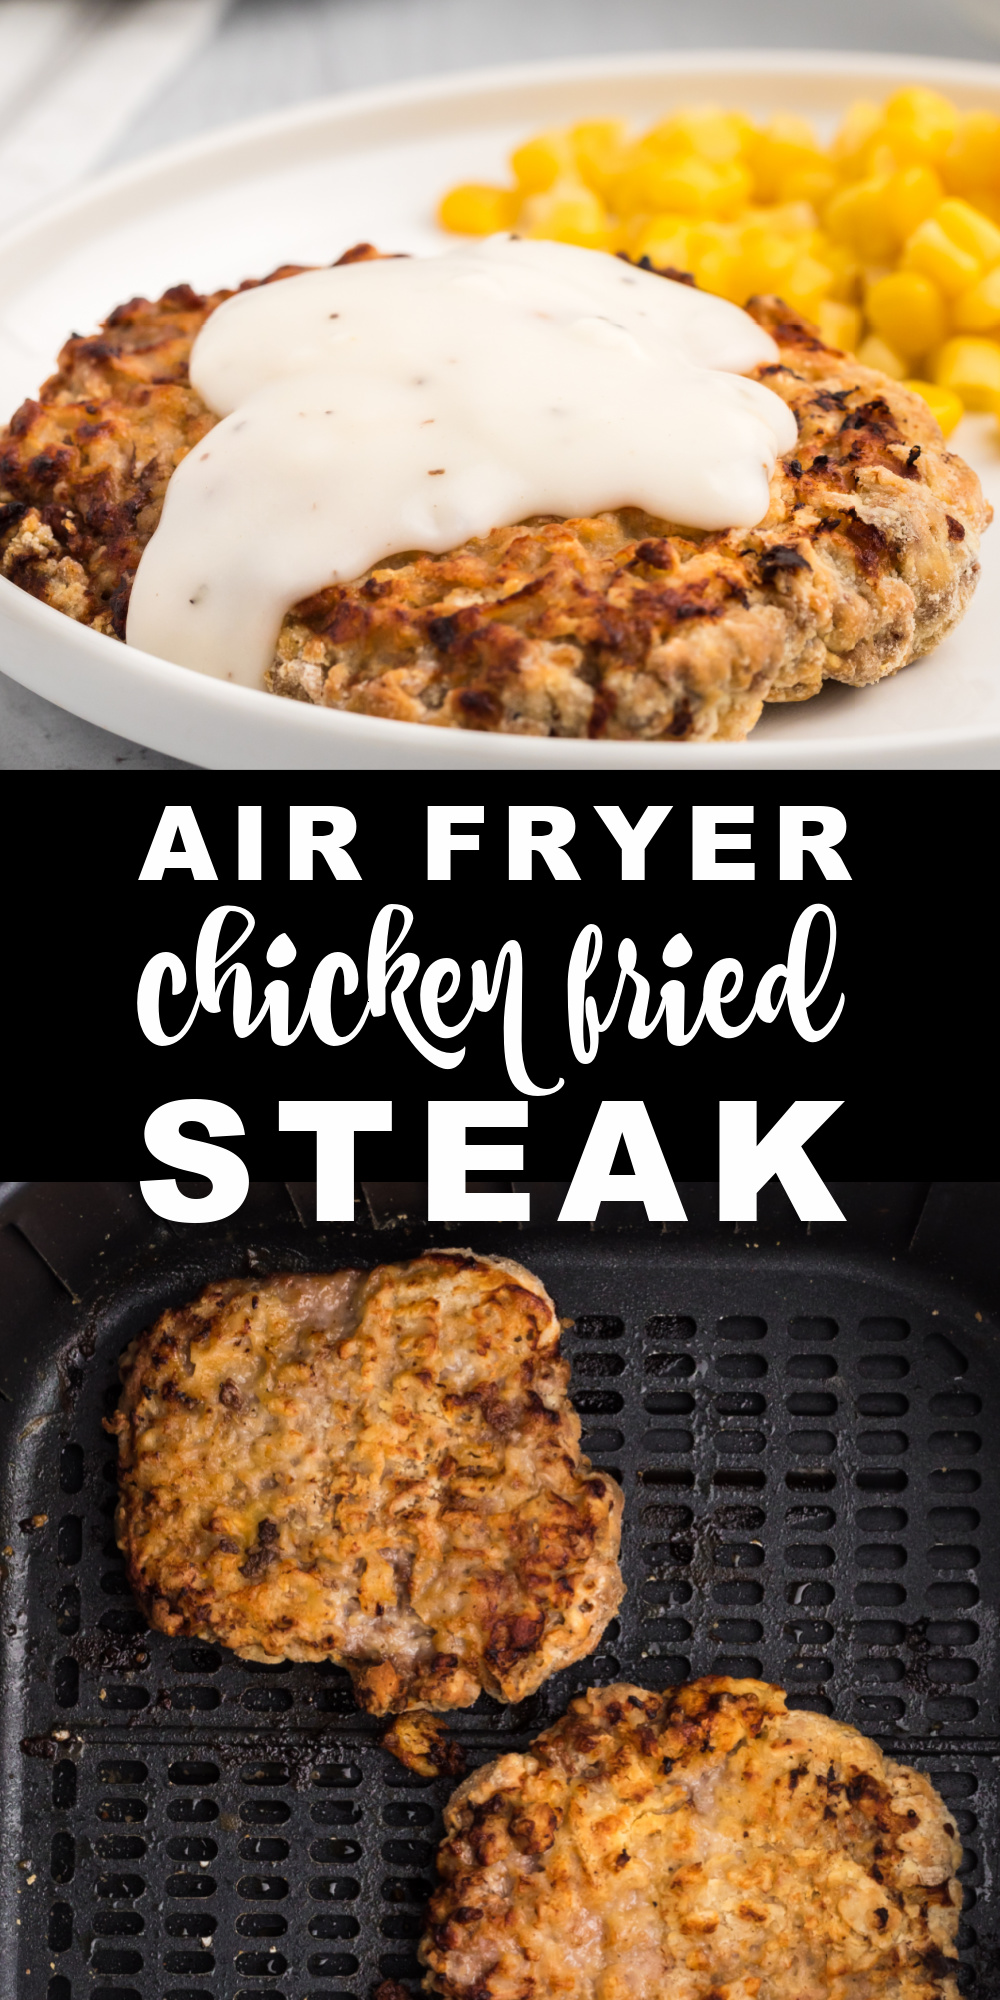 Homemade Air Fryer Chicken Fried Steak is made with cube steak, flour, salt, pepper, milk, egg, and more. This southern style dish is a family favorite and easily made in the air fryer. No deep fryer is needed! Your whole family is going to enjoy this easy air fryer dinner recipe.